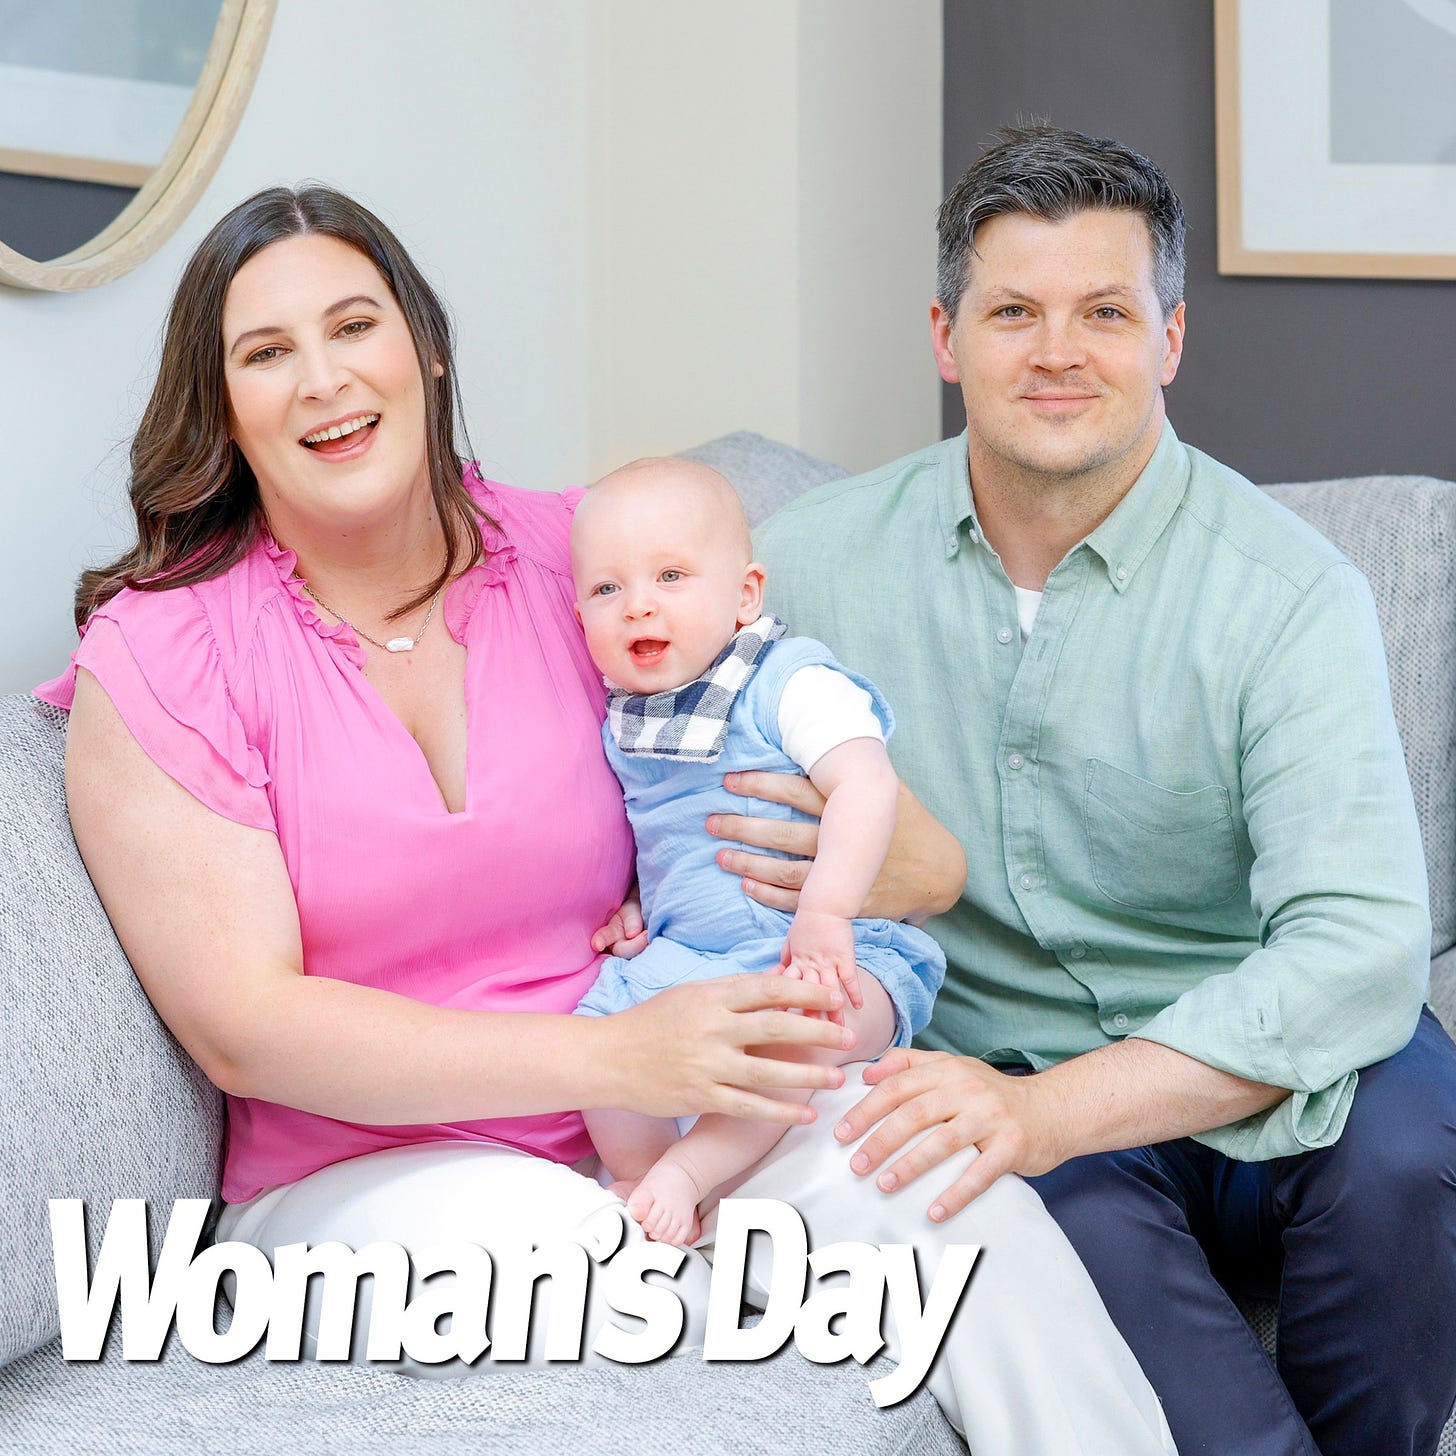 May be an image of 3 people, child, people sitting, indoor and text that says "Woman'sDay"